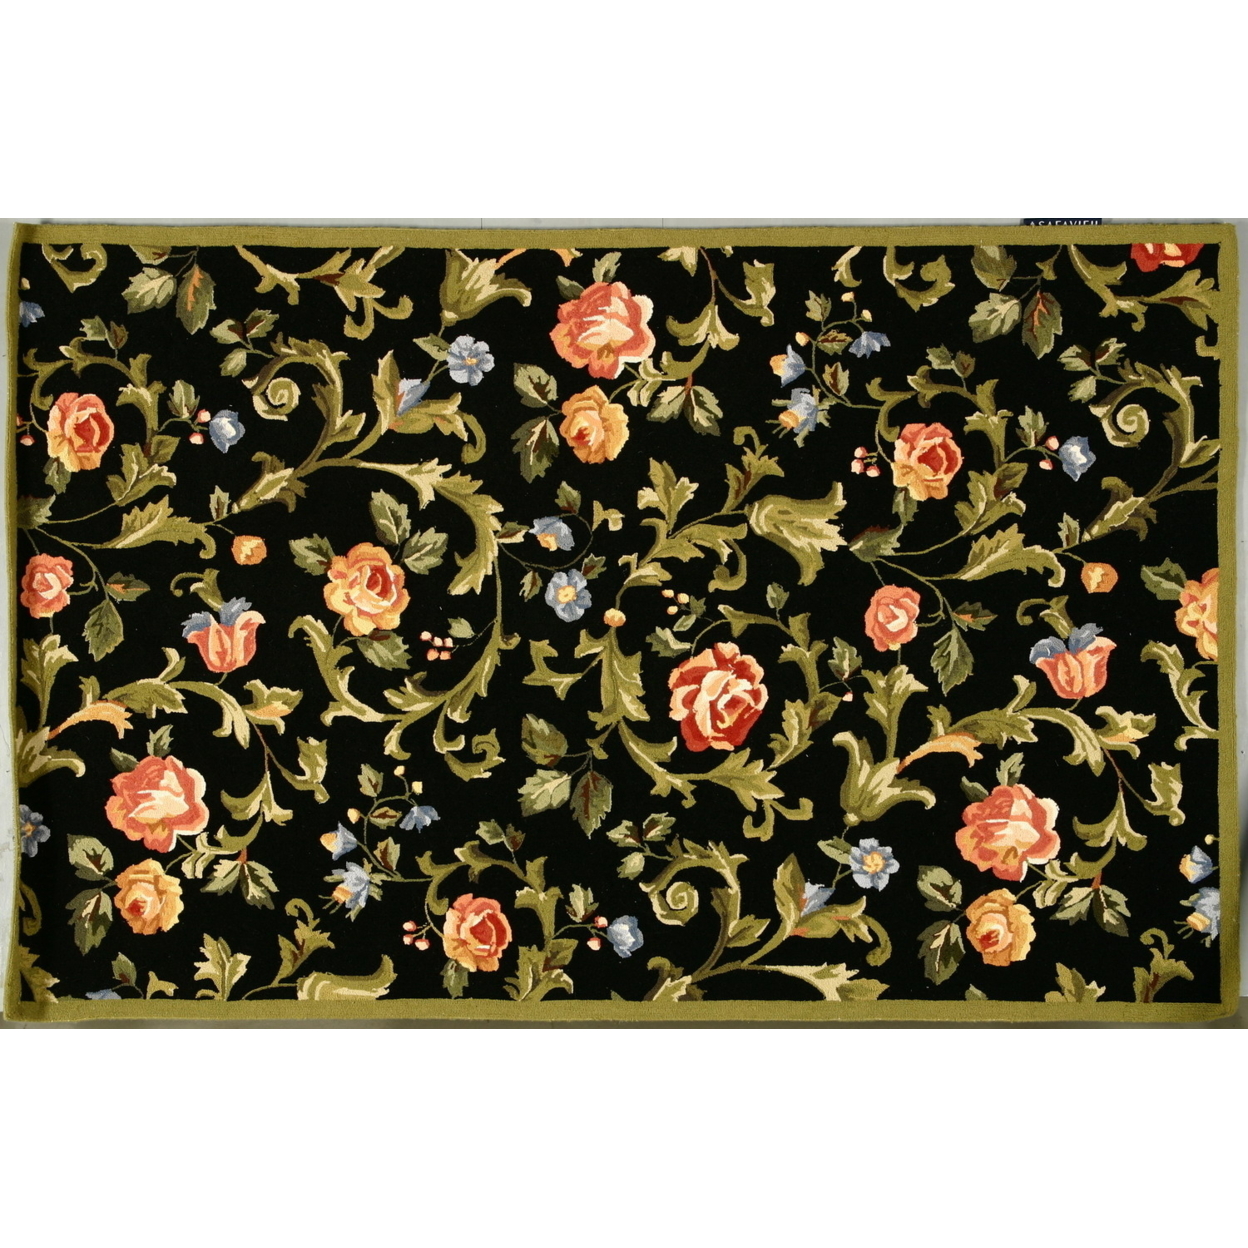 SAFAVIEH Chelsea Collection HK310B Hand-hooked Black Rug - 7' 6 X 9' 6 Oval